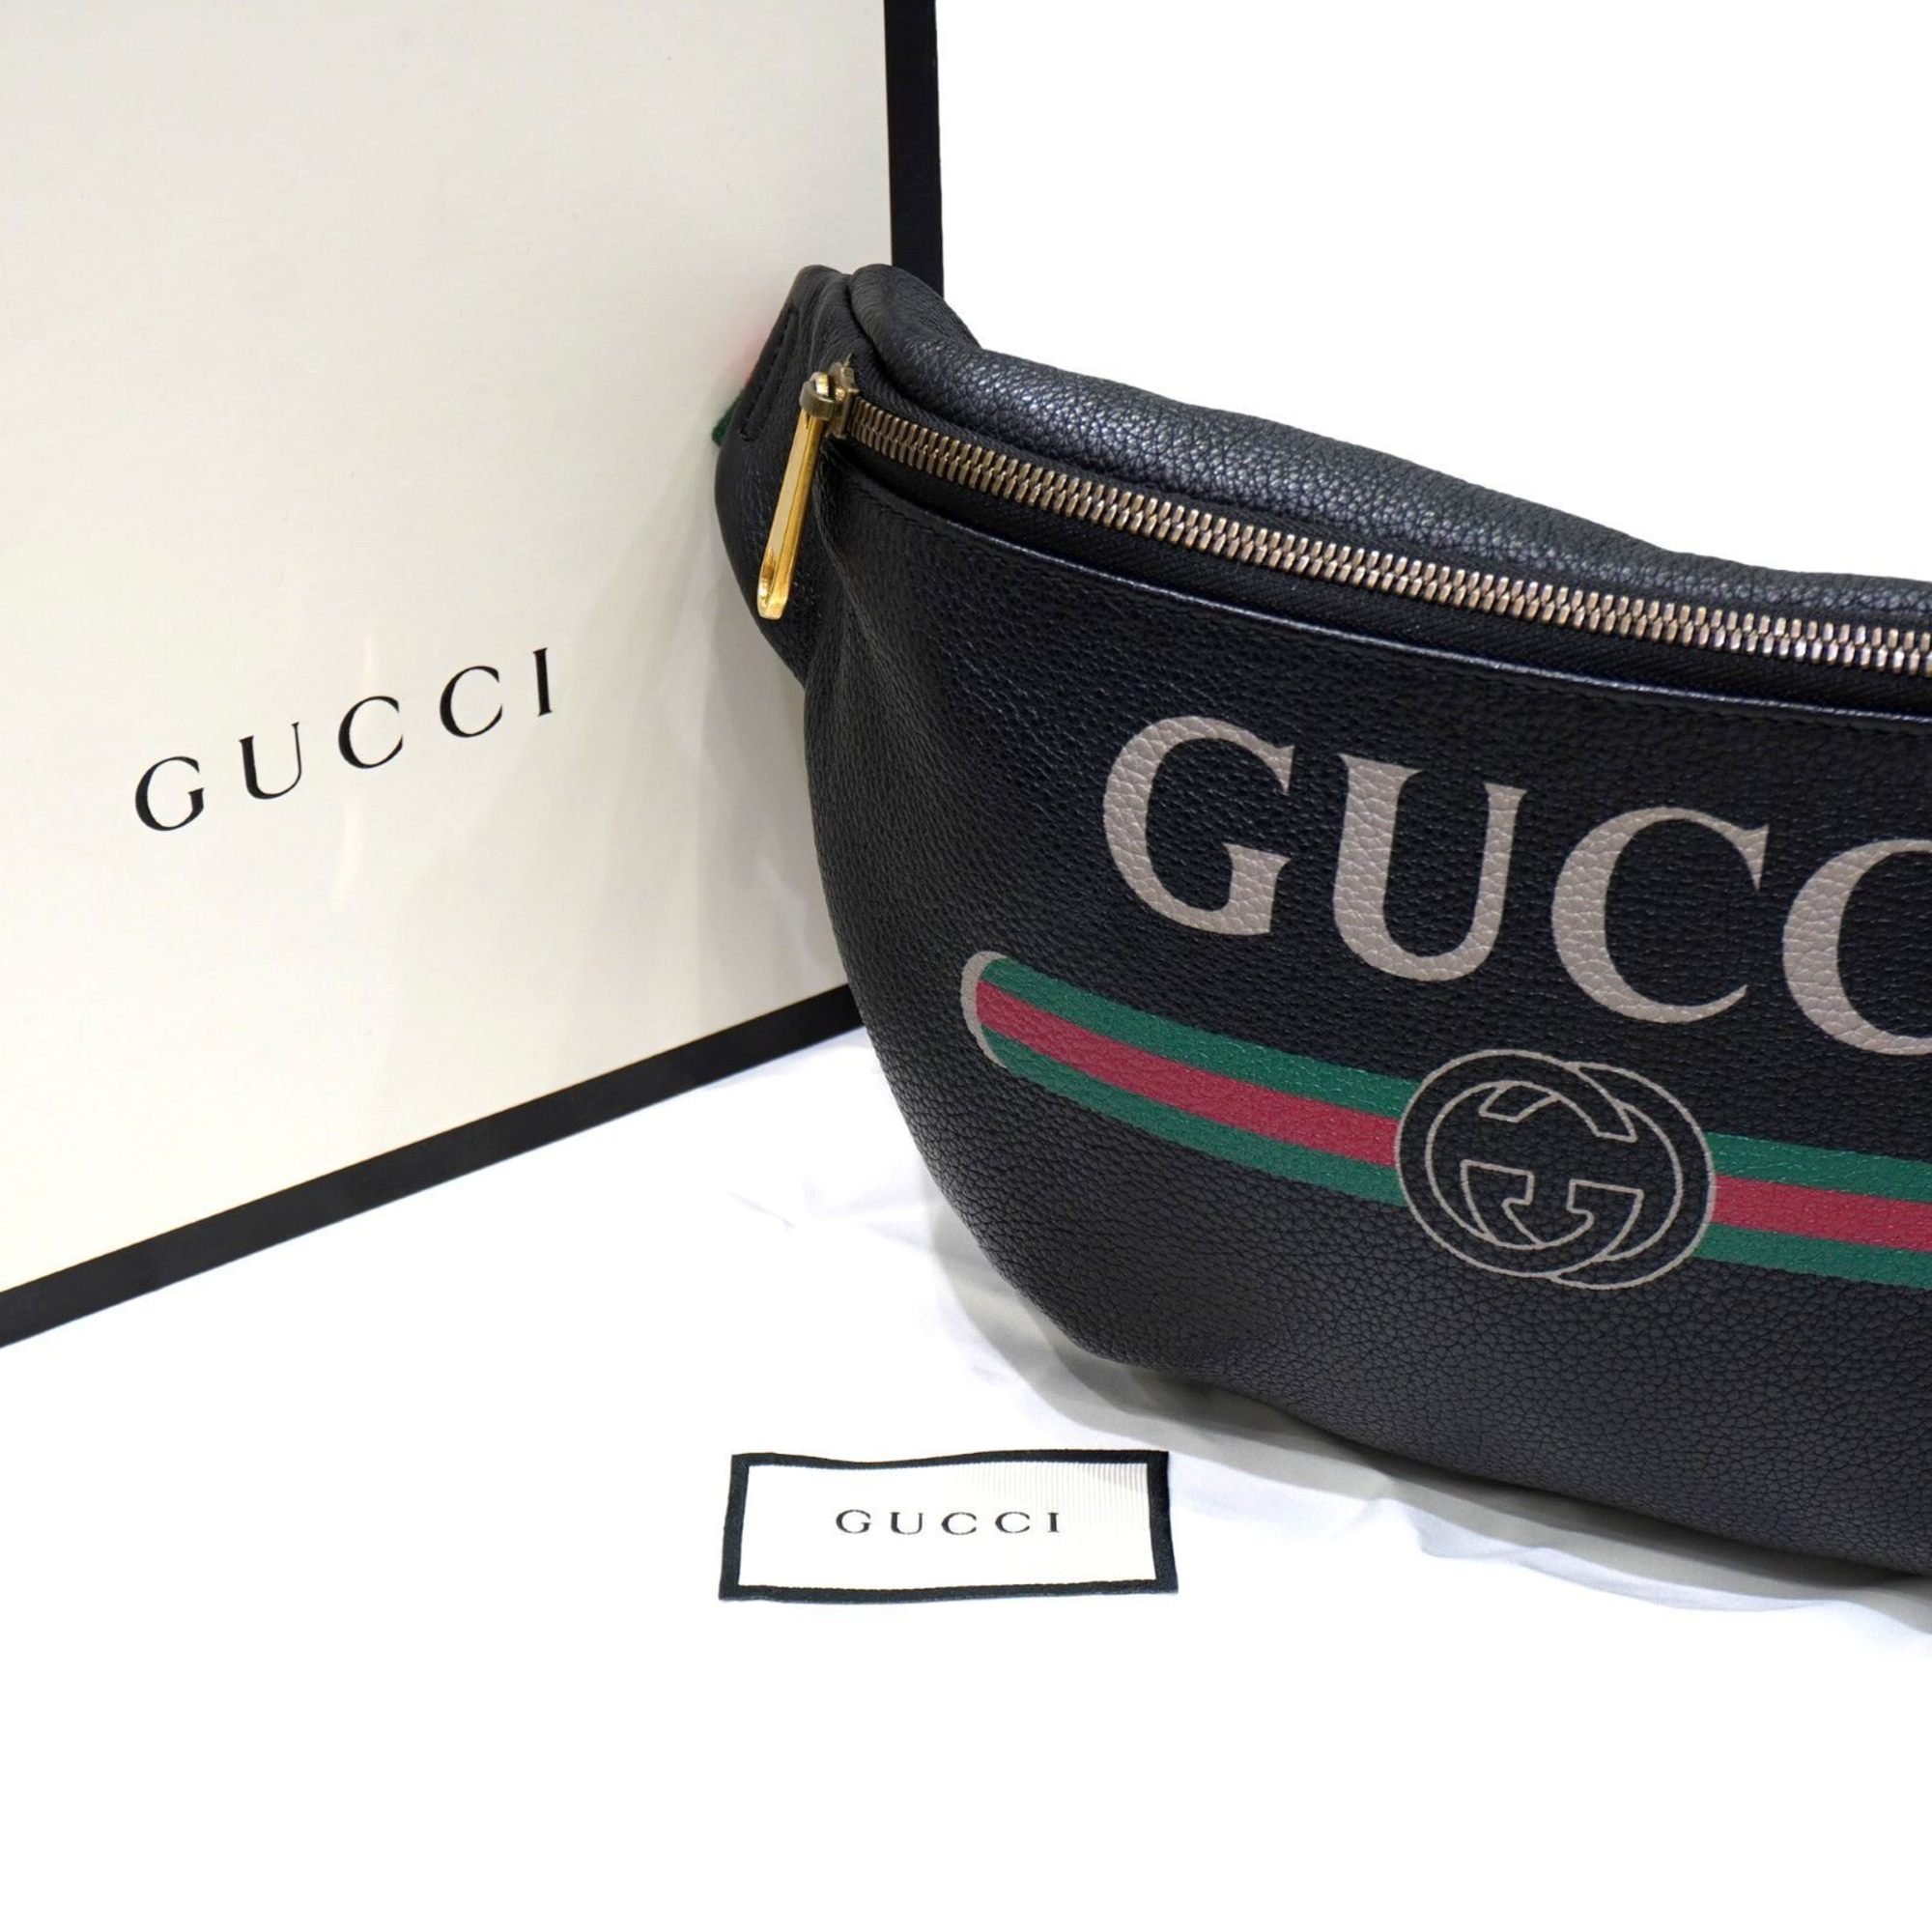 GUCCI Body Bag Black Leather A352 Women's and Men's Bags